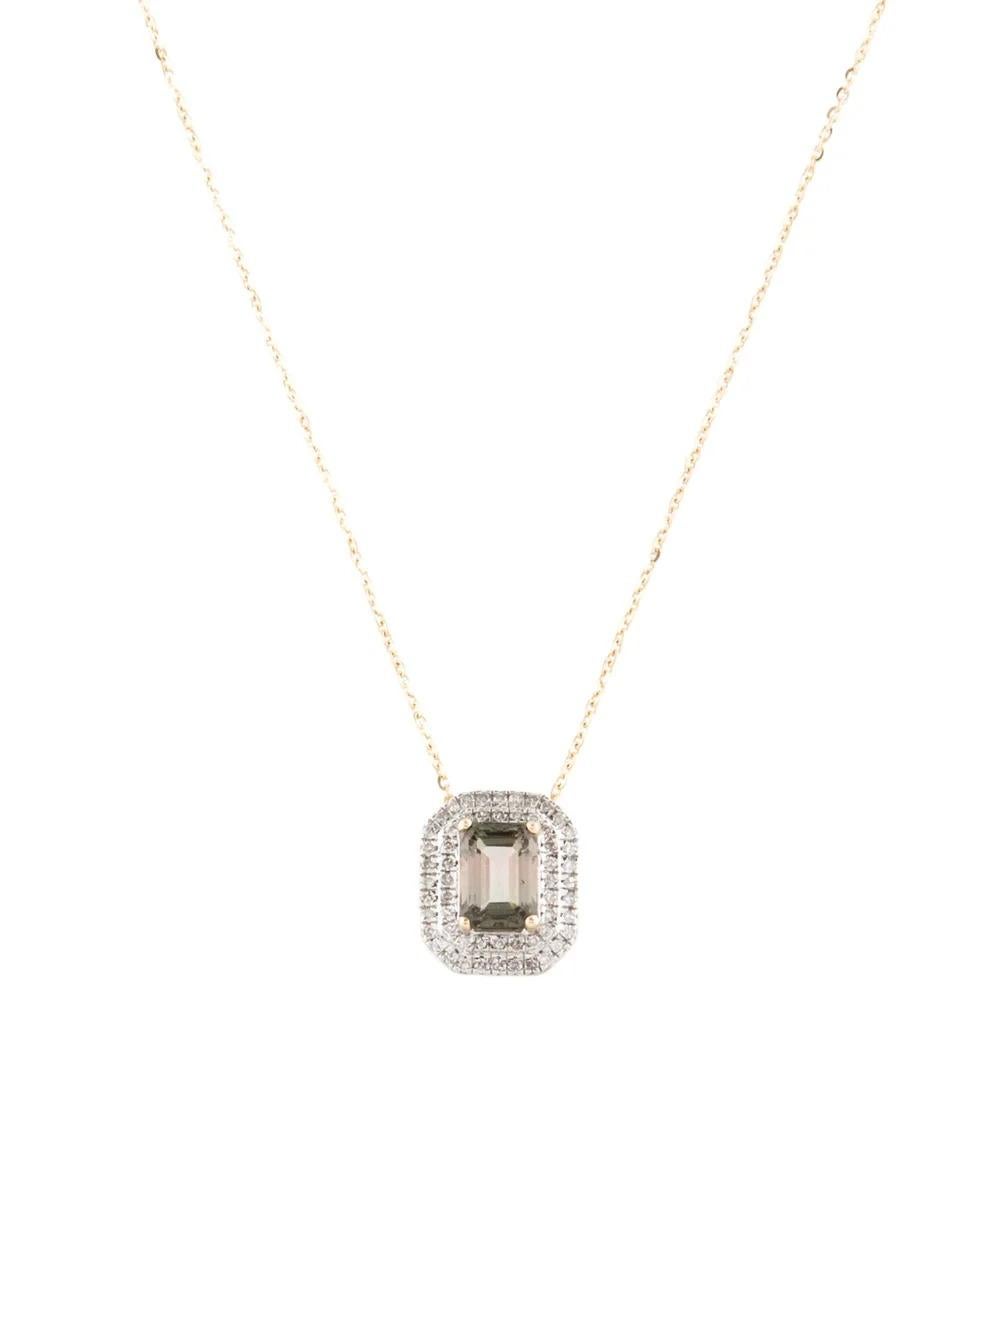 Experience timeless elegance with this exquisite pendant necklace crafted in 14K yellow gold. Adorned with a stunning 1.06 carat emerald-cut tourmaline, this piece exudes sophistication and luxury. Paired with 57 brilliant single-cut diamonds